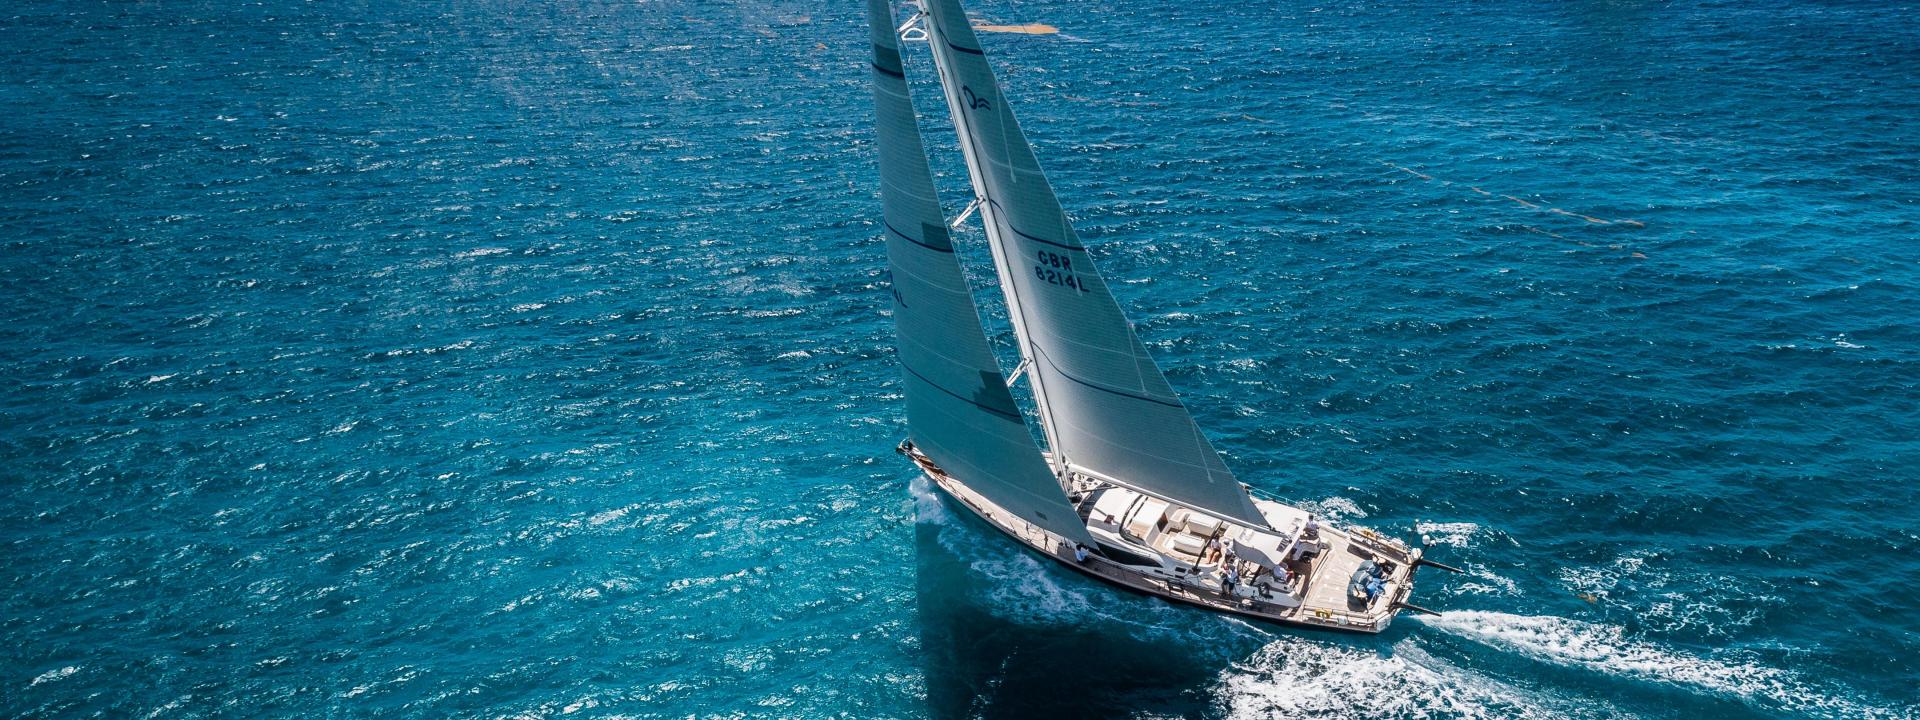 Bluwater Sailing Yacht Oyster Heritage D v32